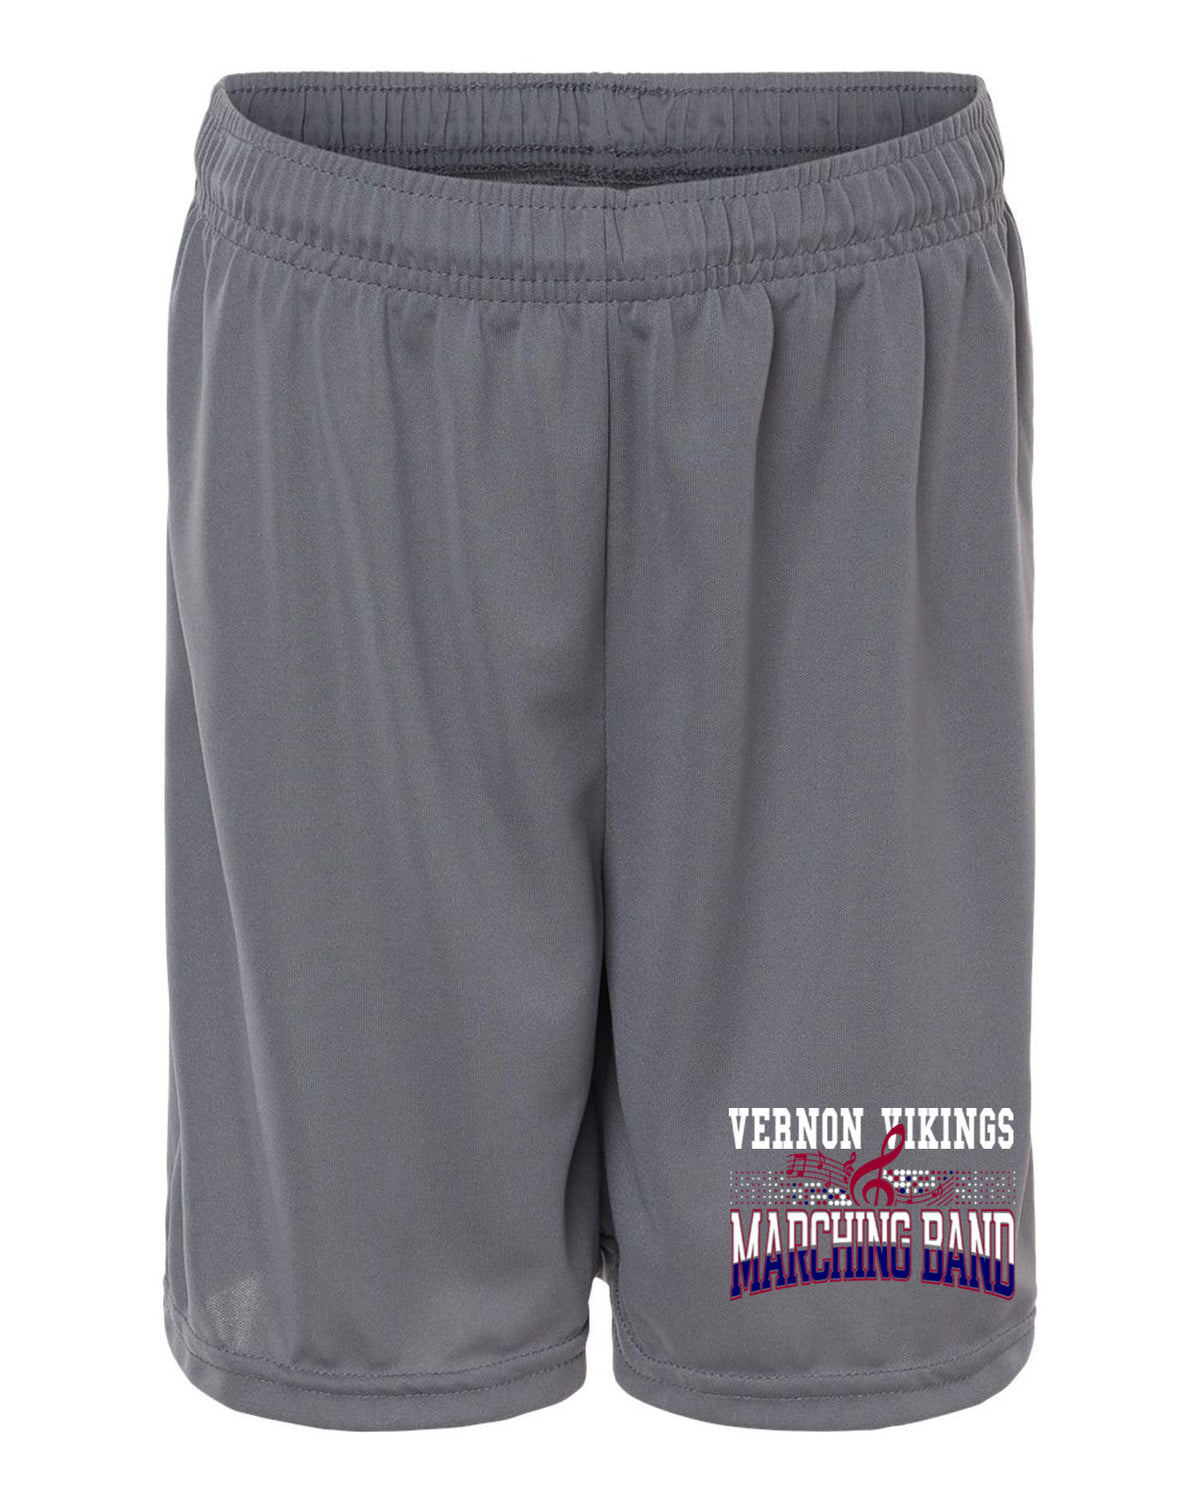 Vernon Marching Band Performance Shorts Design 6